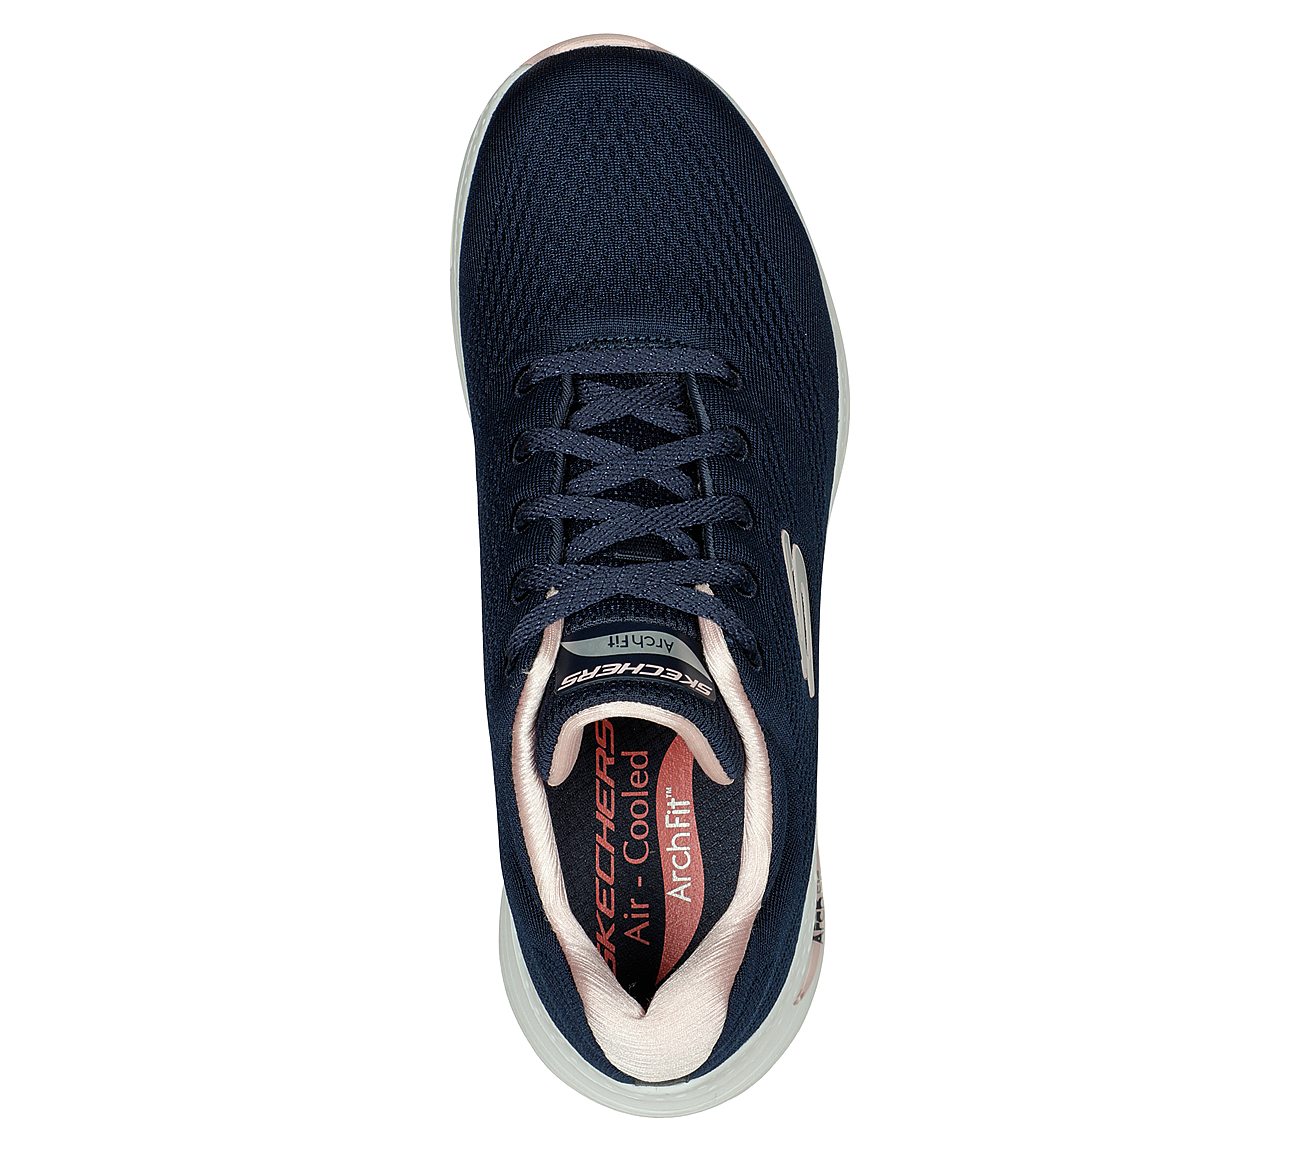 ARCH FIT - BIG APPEAL, NAVY/PINK Footwear Top View